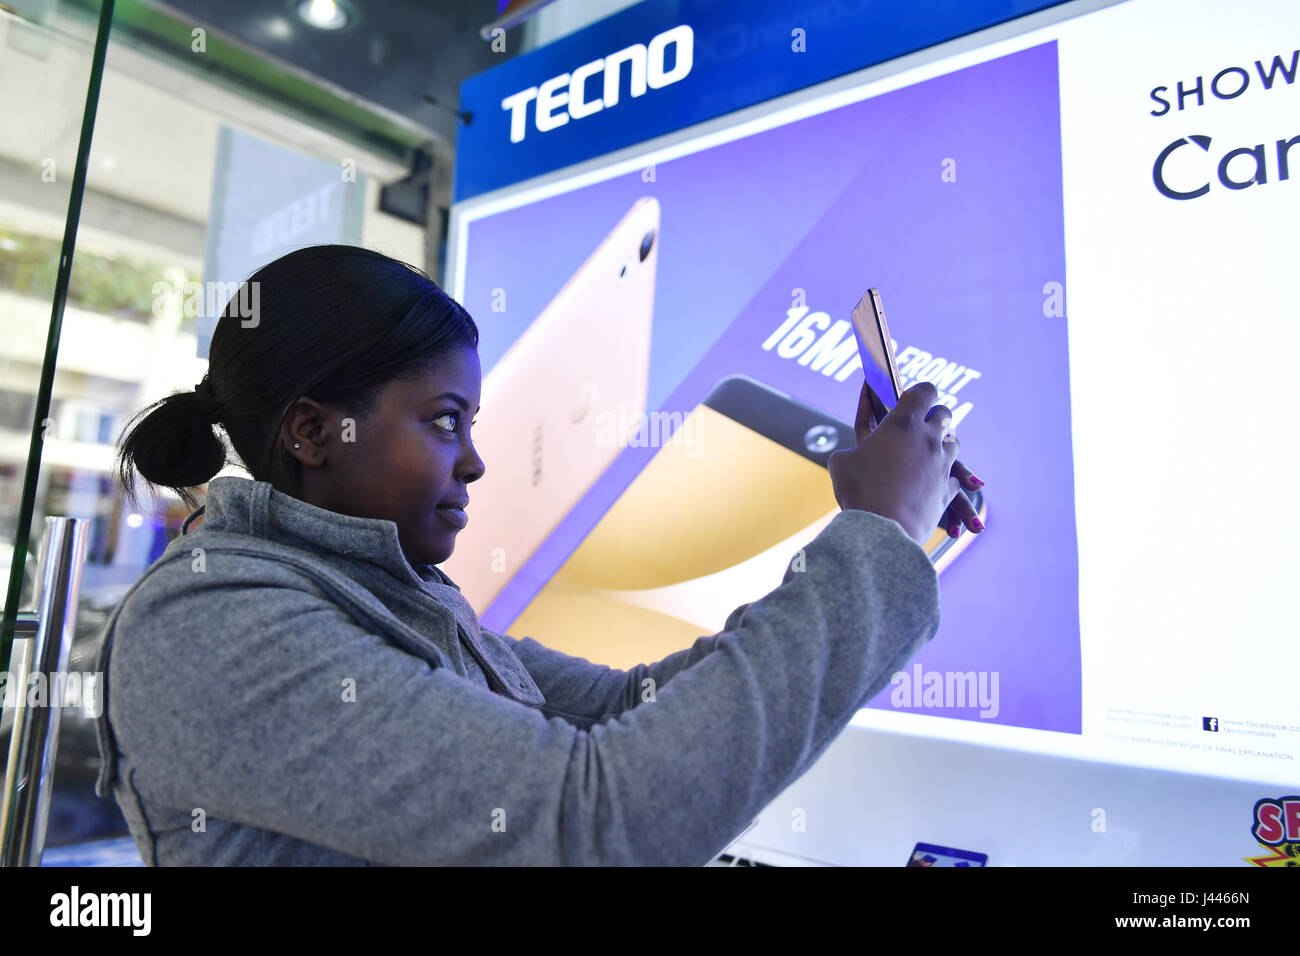 (170510) -- NAIROBI, May 10, 2017 (Xinhua) -- A customer takes selfies with Tecno mobile phone in downtown Nairobi, capital of Kenya, on May 9, 2017. Chinese mobile phone manufacturer Tecno Mobile sales reached 25 million devices, including 9 million smartphones in 2015, helping it to sustain the most 'popular' brand status in Africa. (Xinhua/Sun Ruibo) (jmmn) Stock Photo